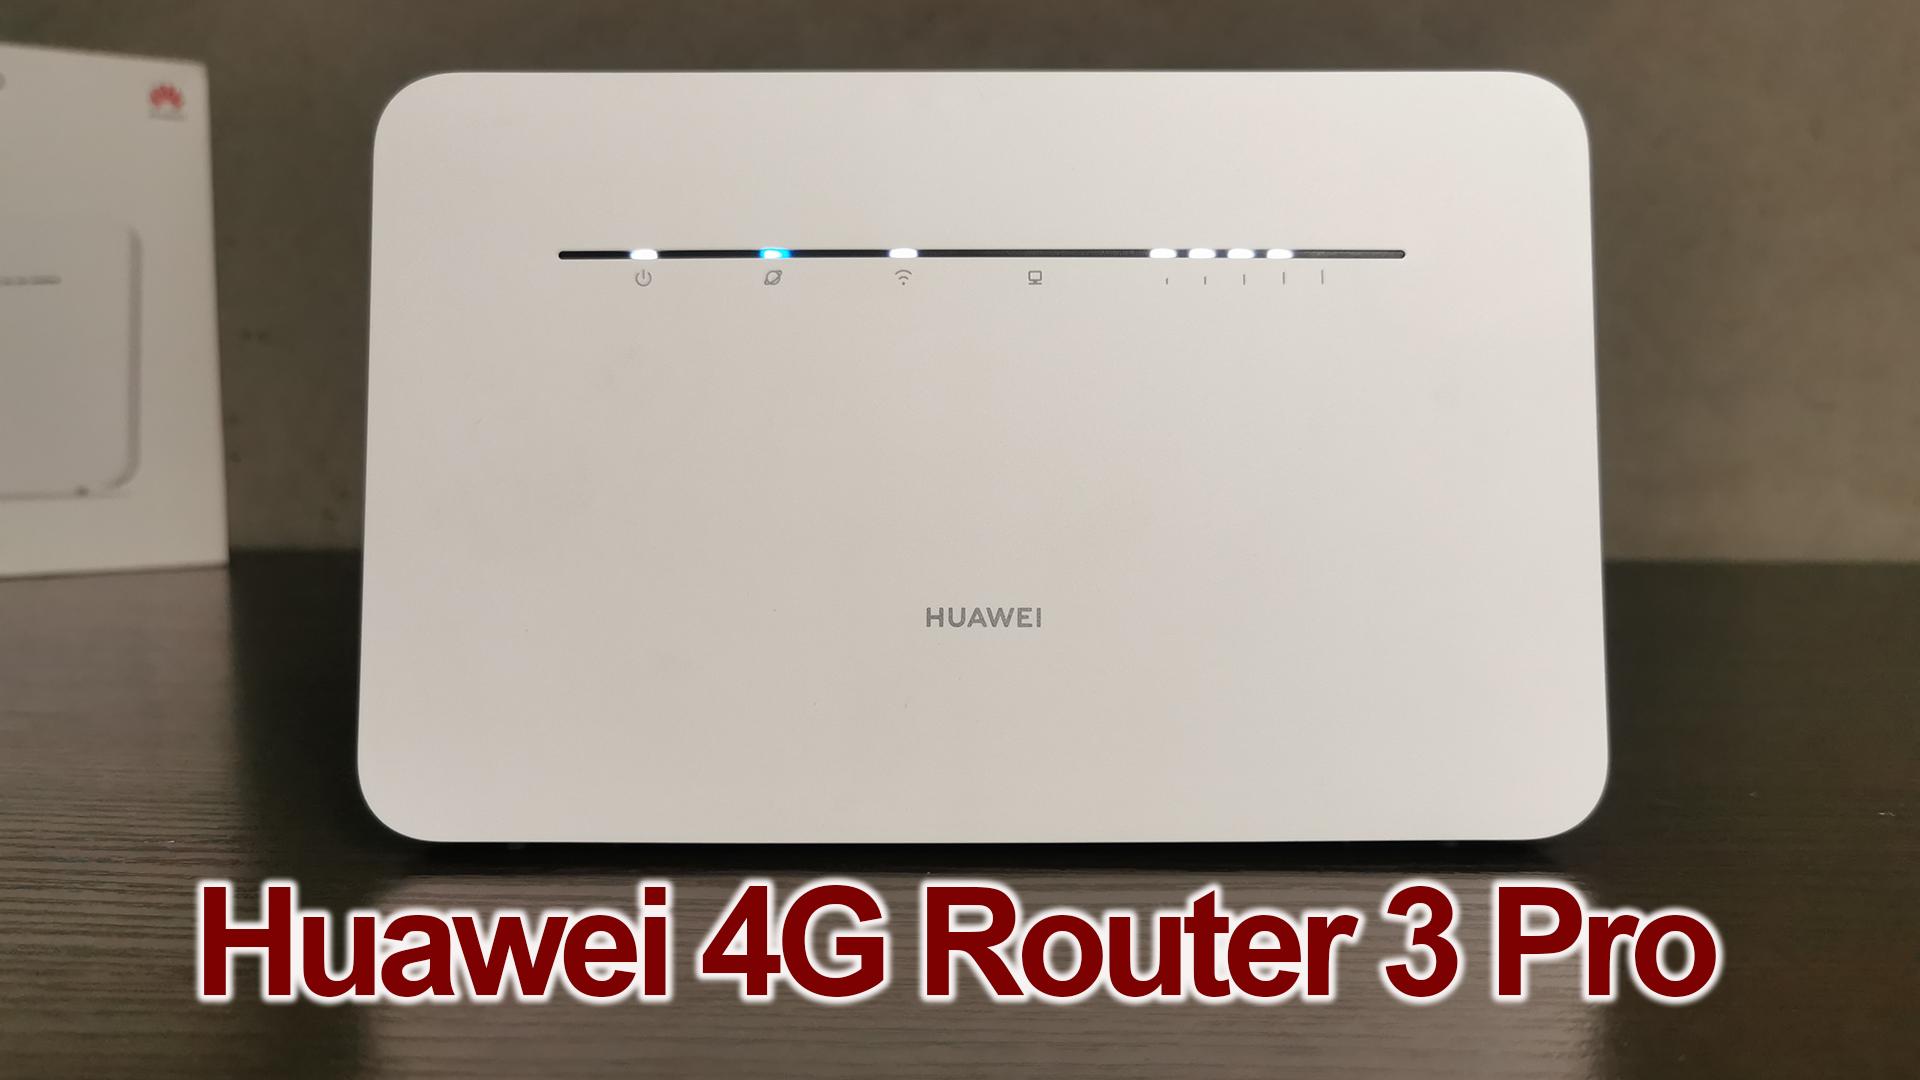 Vend tilbage ankel statisk Huawei 4G Router 3 Pro. Are the features worth the money? - Techzim